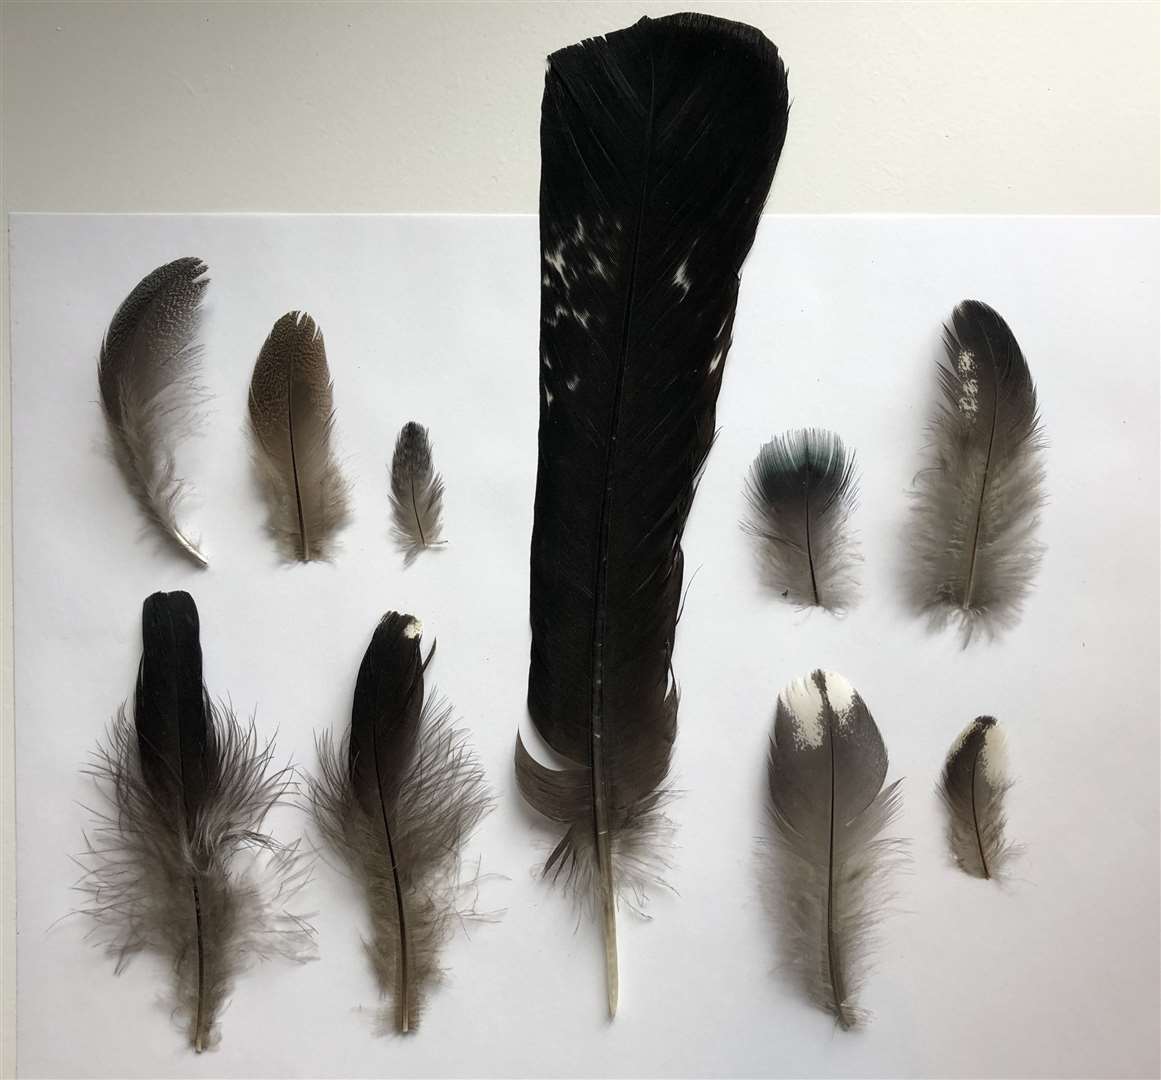 Black grouse feathers were collected by the local community.  Photo: The Capercaillie Project at Cairngorms.